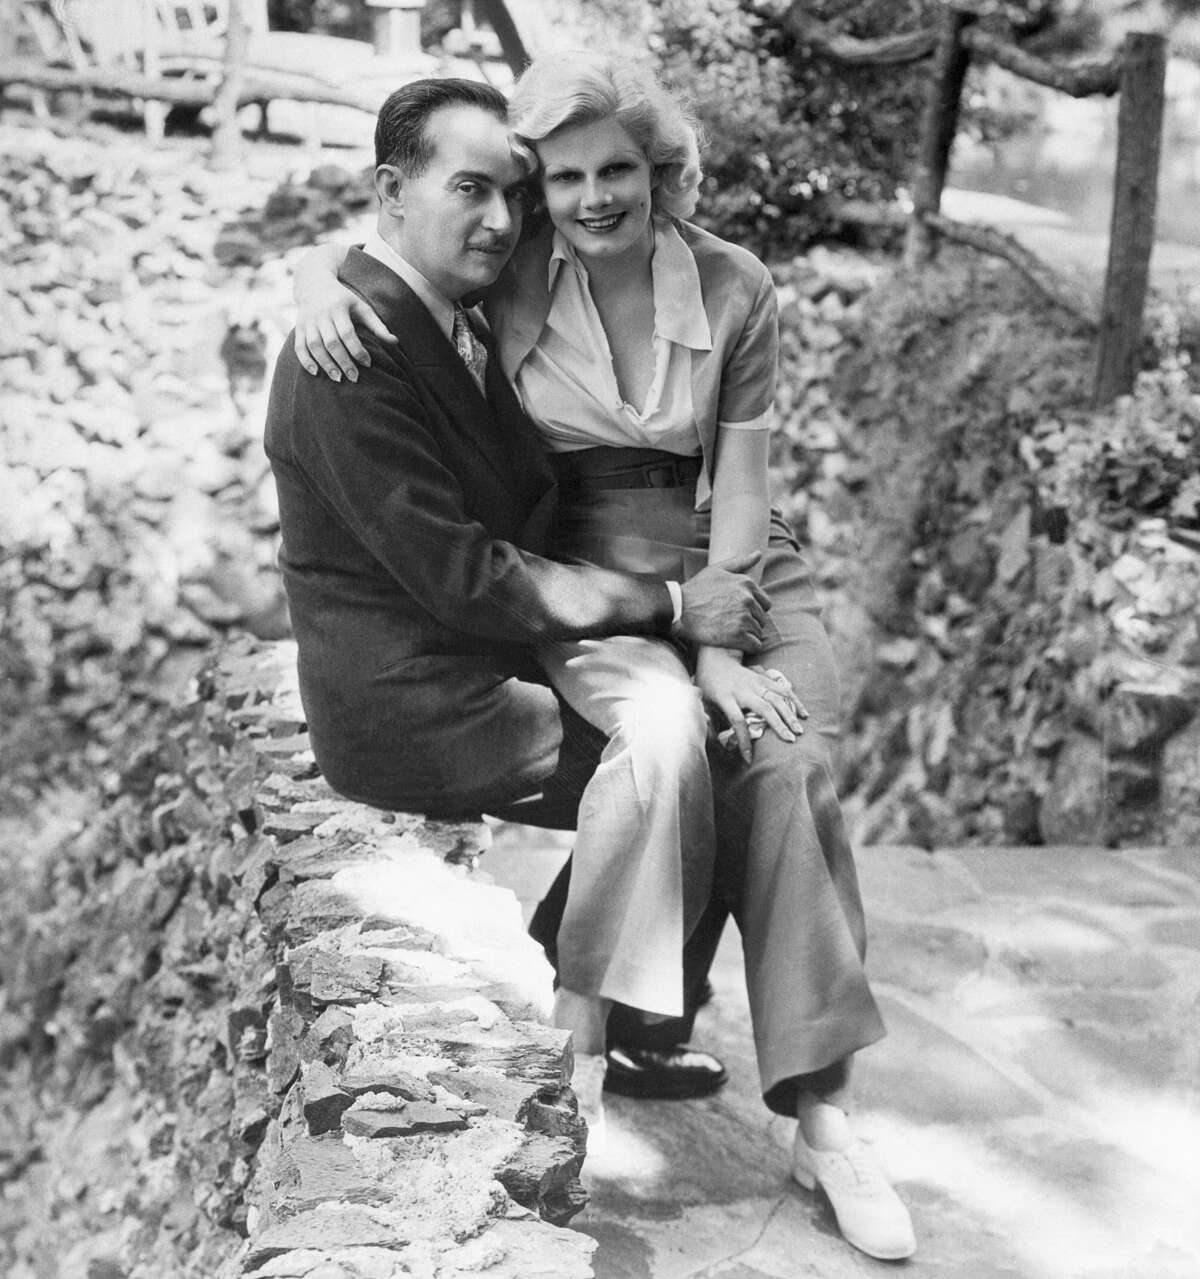 Paul Bern, noted producer, writer and studio executive, whose suicide shocked the country, and his bride, Jean Harlow. This picture was taken shortly after their 1932 marriage.